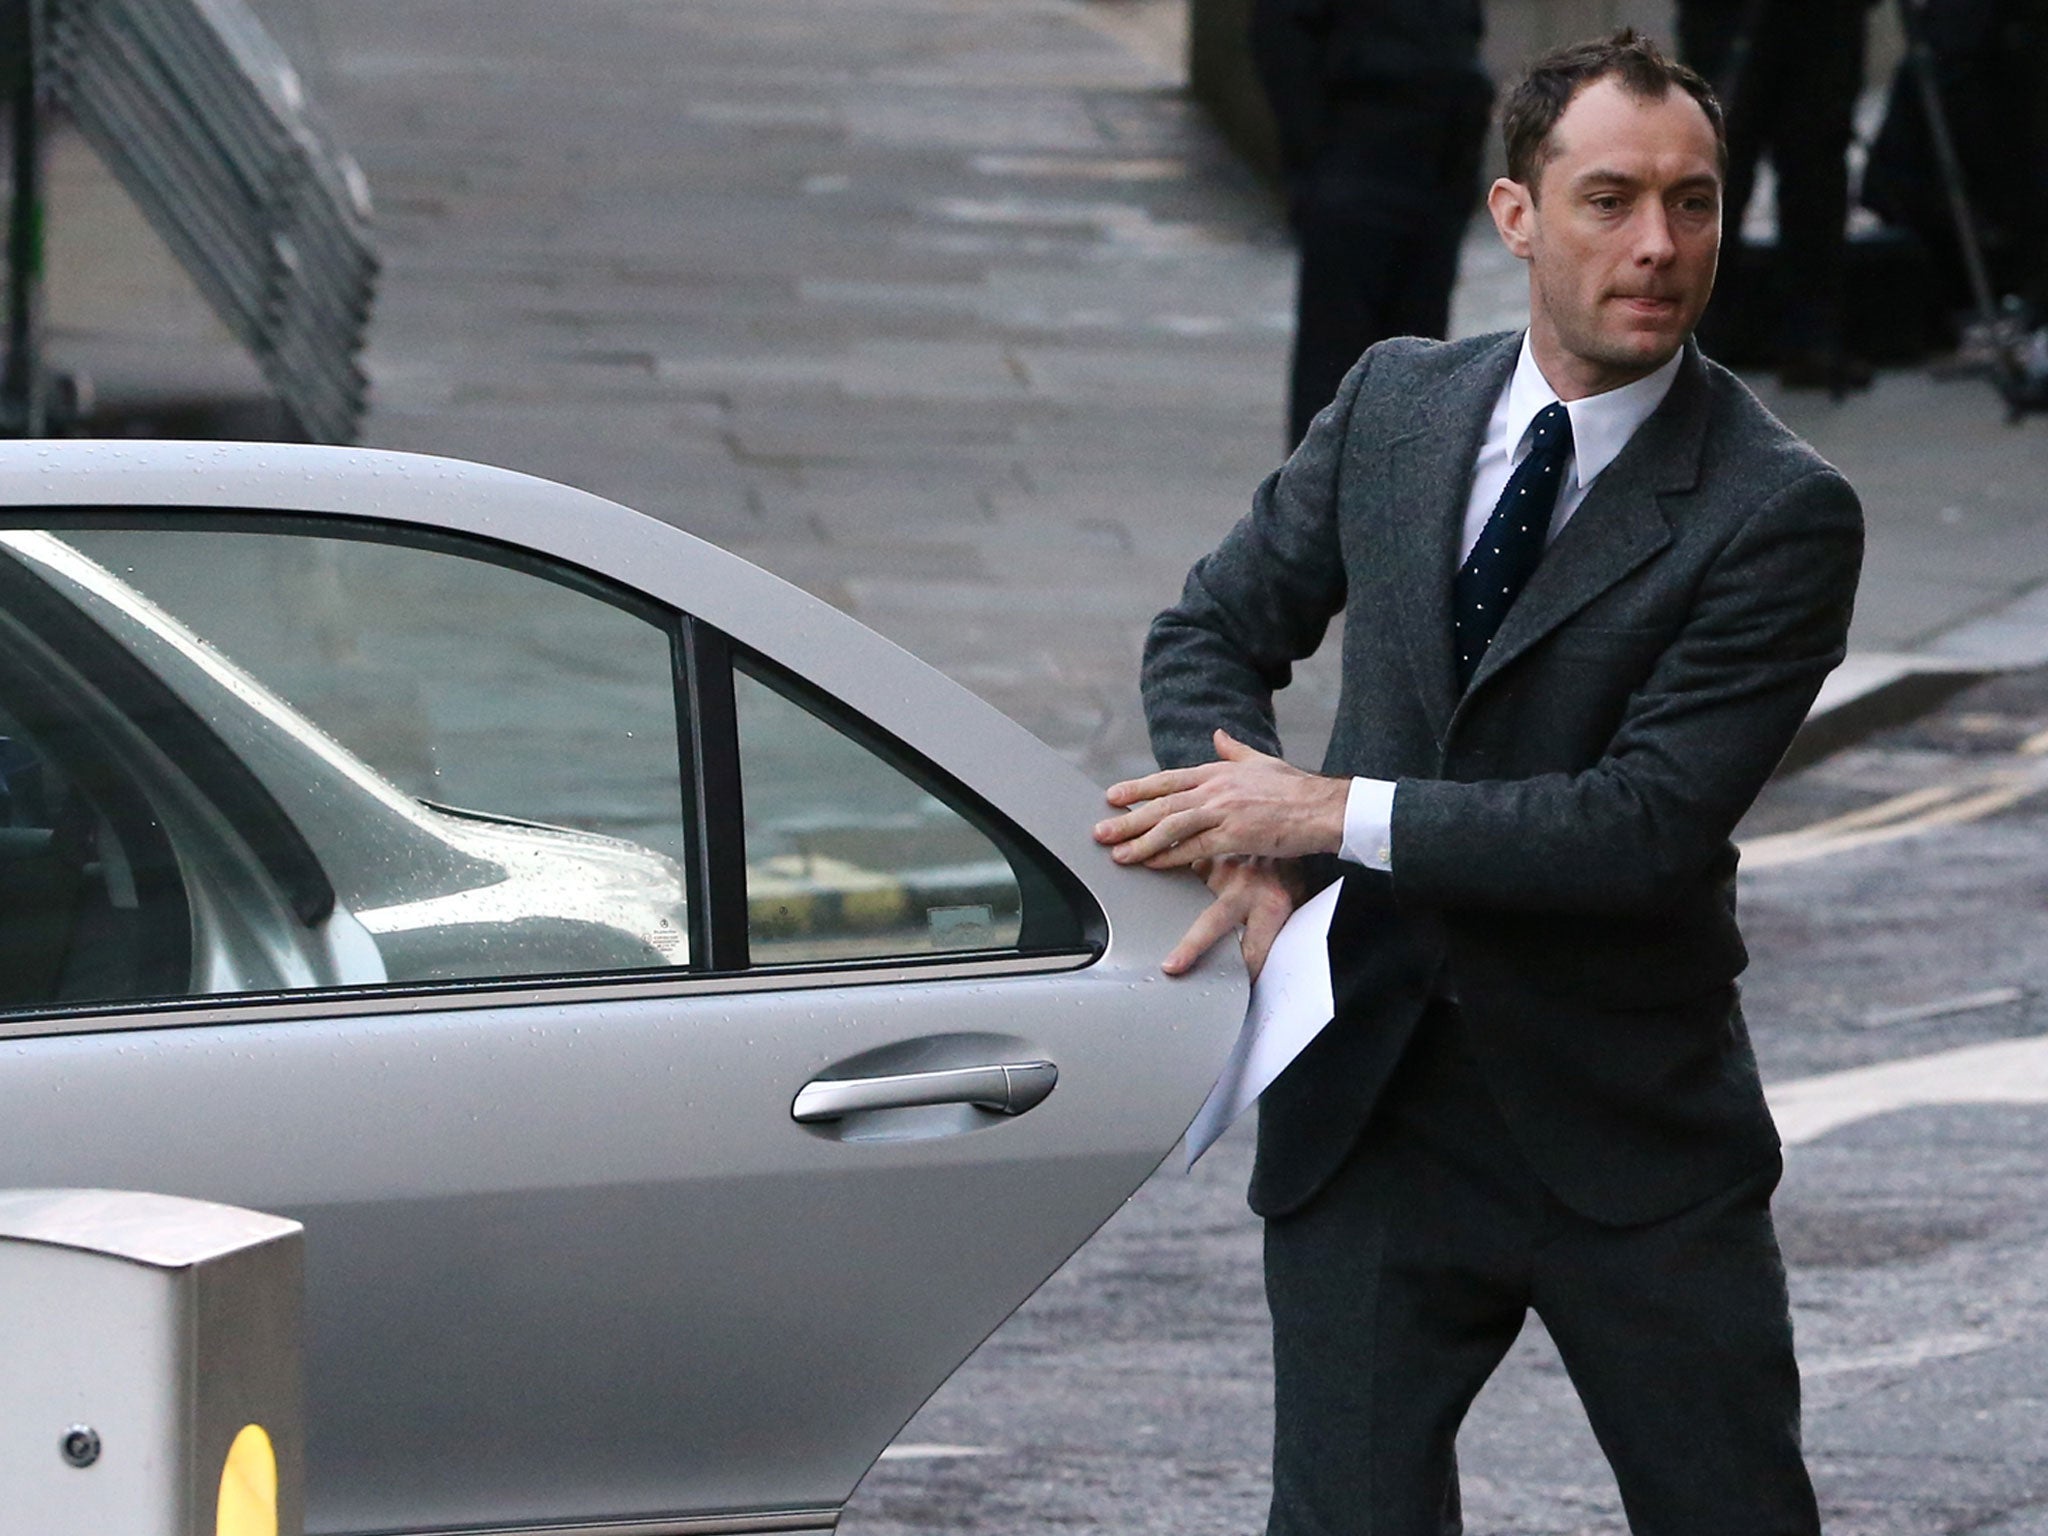 Actor Jude Law arriving at the phone-hacking trial to give evidence on 27 January 2014 (Getty)